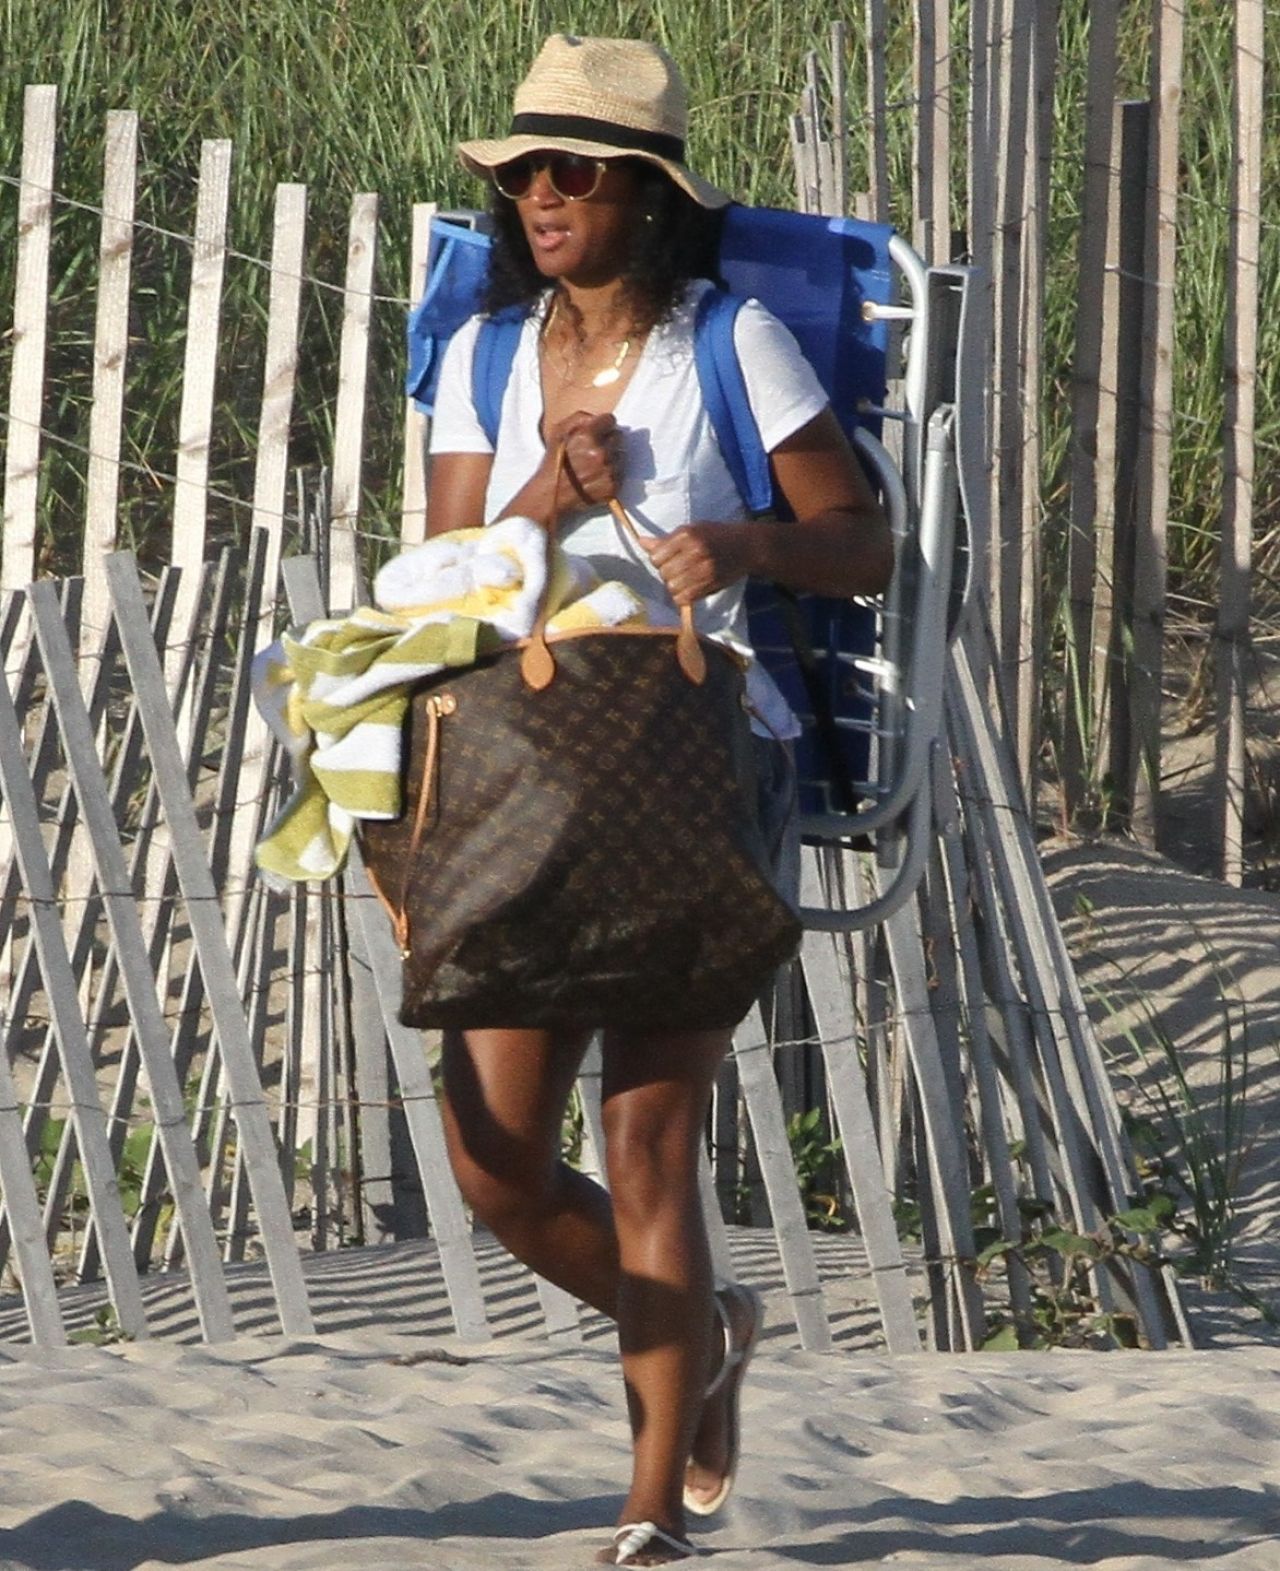 solange-knowles-at-the-beach-in-the-hamptons-07-16-2020-3.jpg